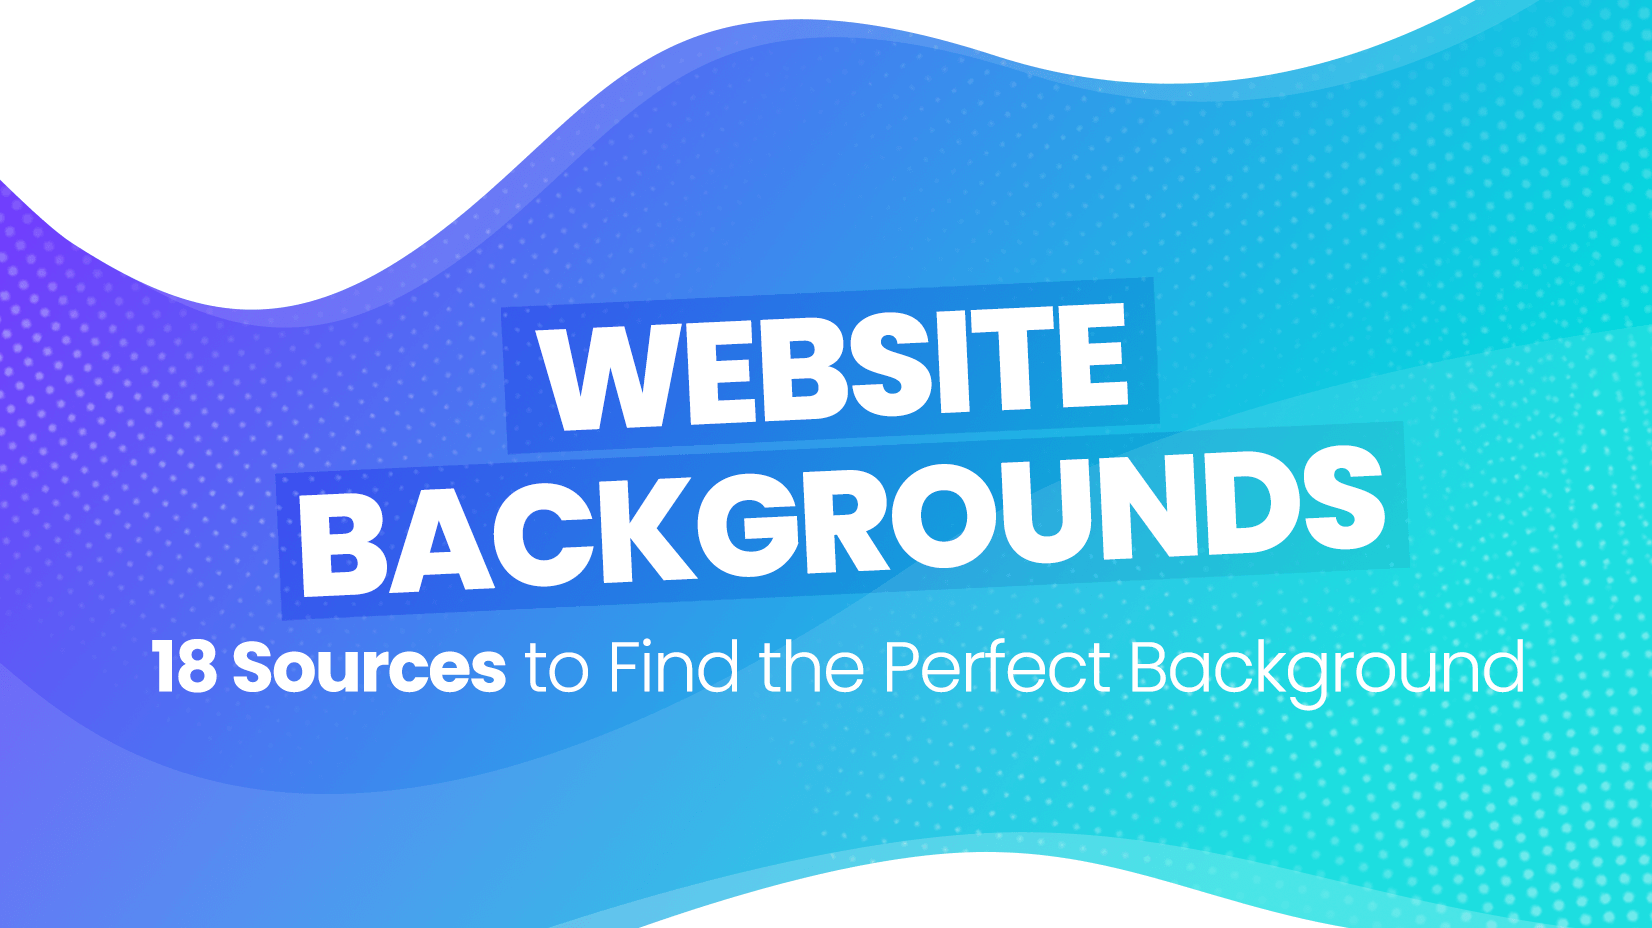 Website Background Sources To Find The Perfect Background